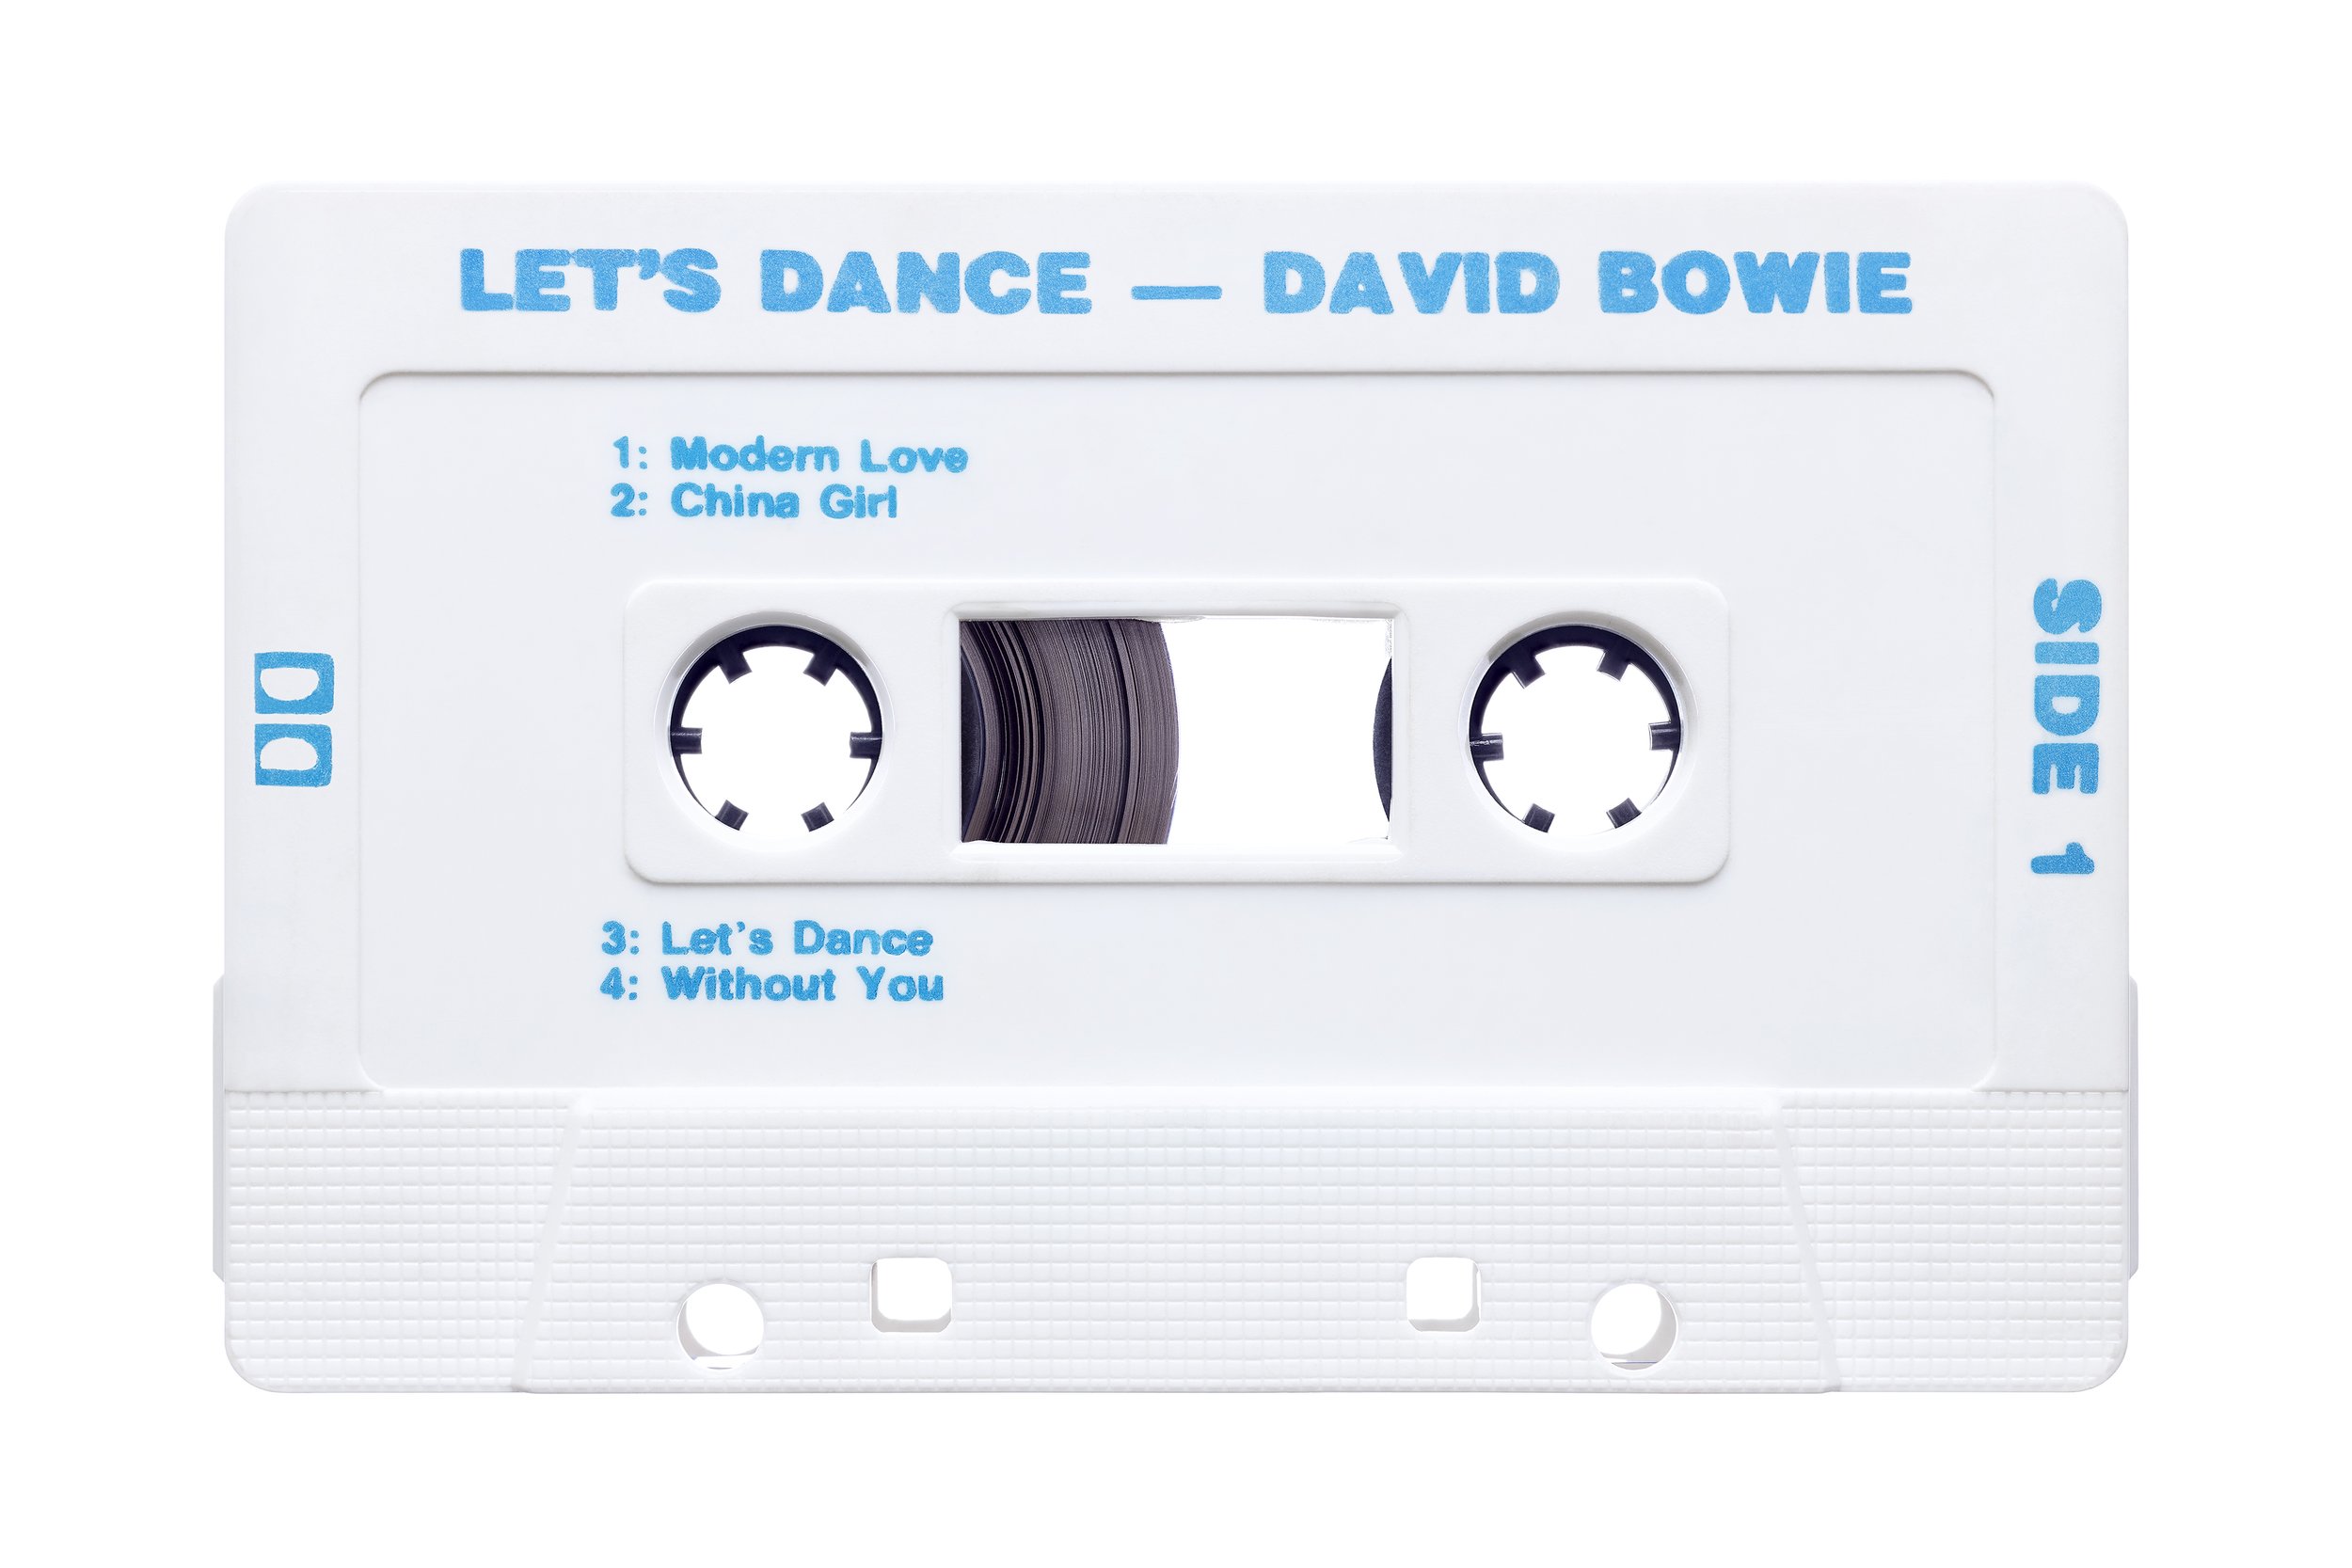  David Bowie - Let’s Dance  Available through   Clic Gallery   in New York.    Contact   